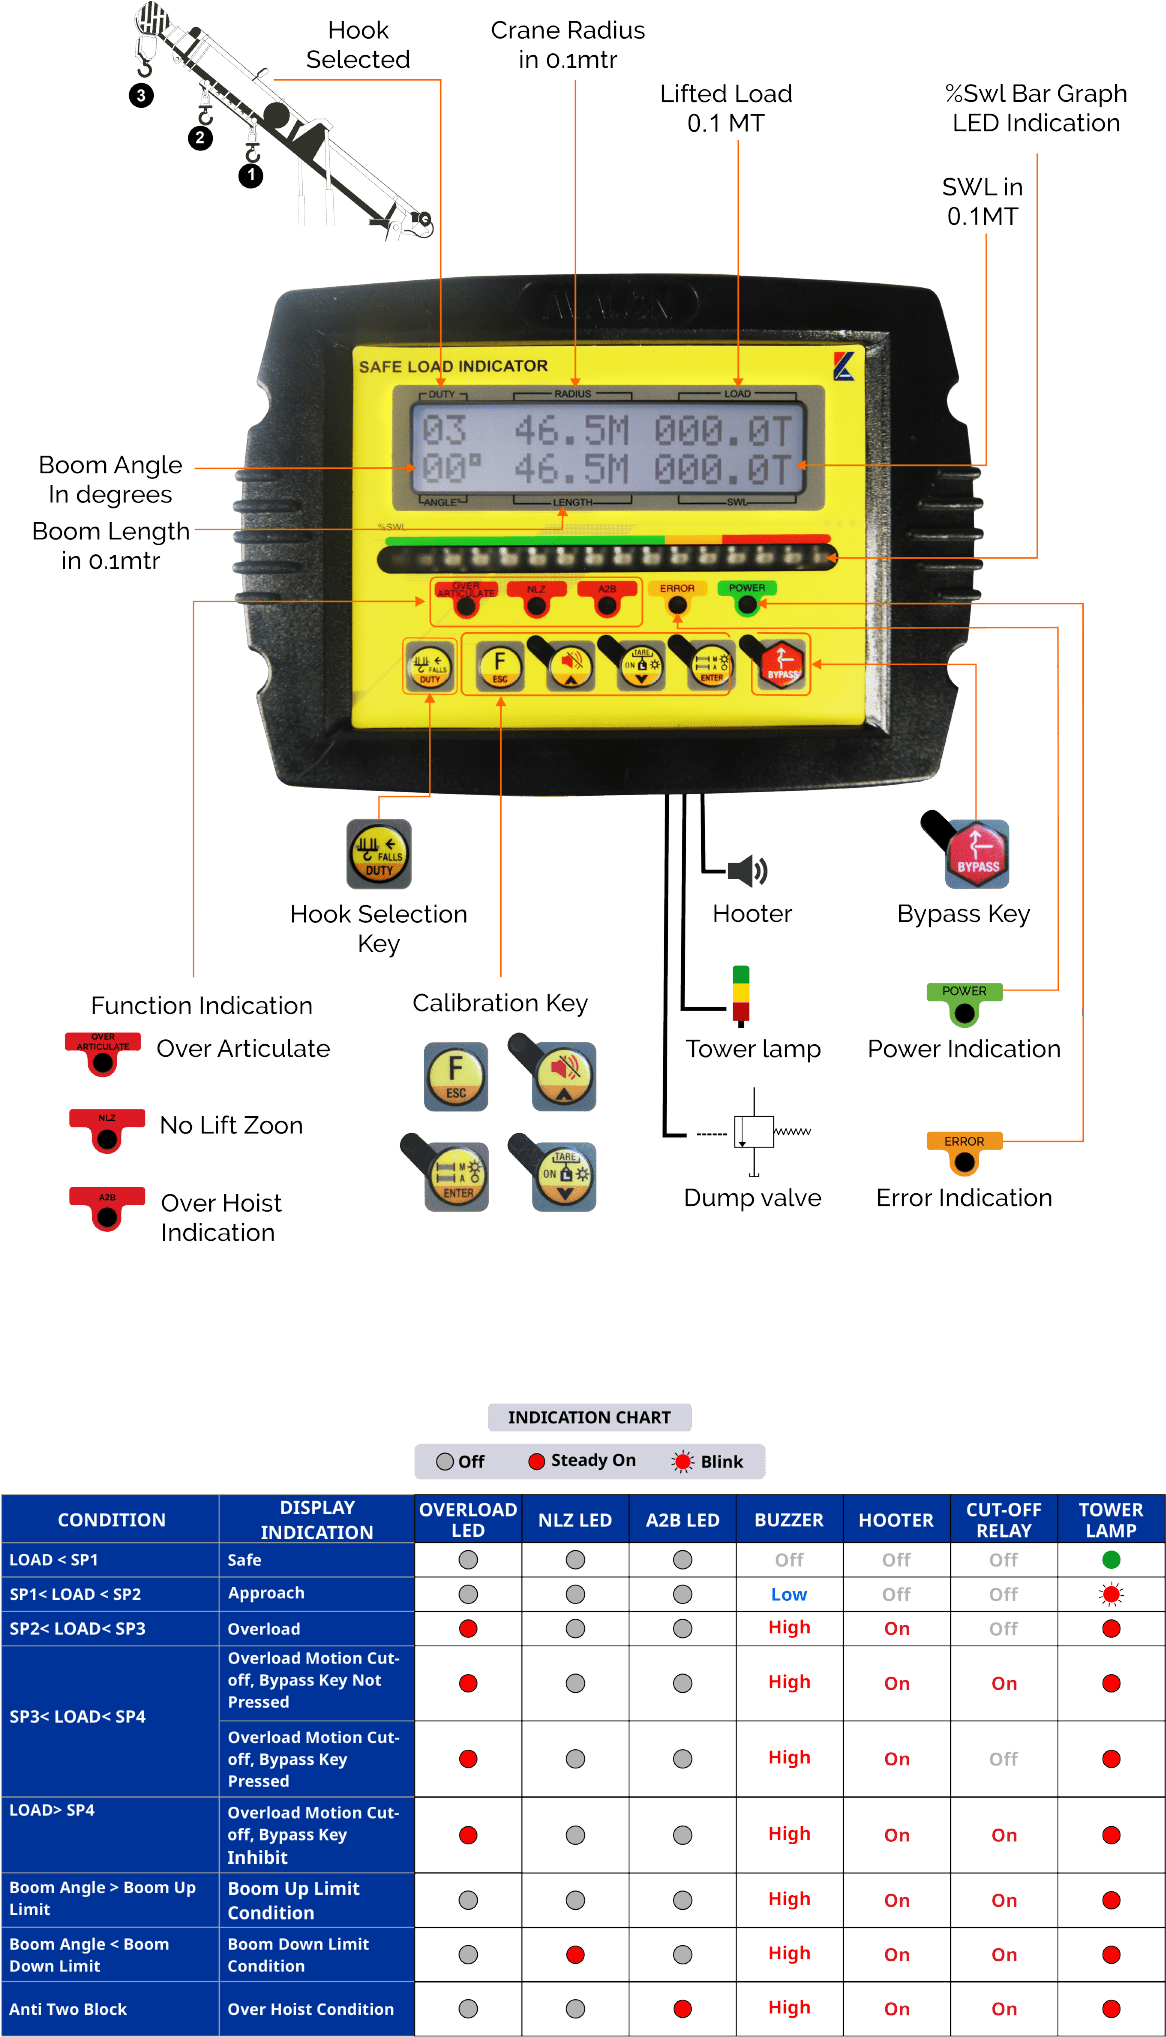 Safe Load Indicator for Pick and Carry Crane LMI Hydra RCI